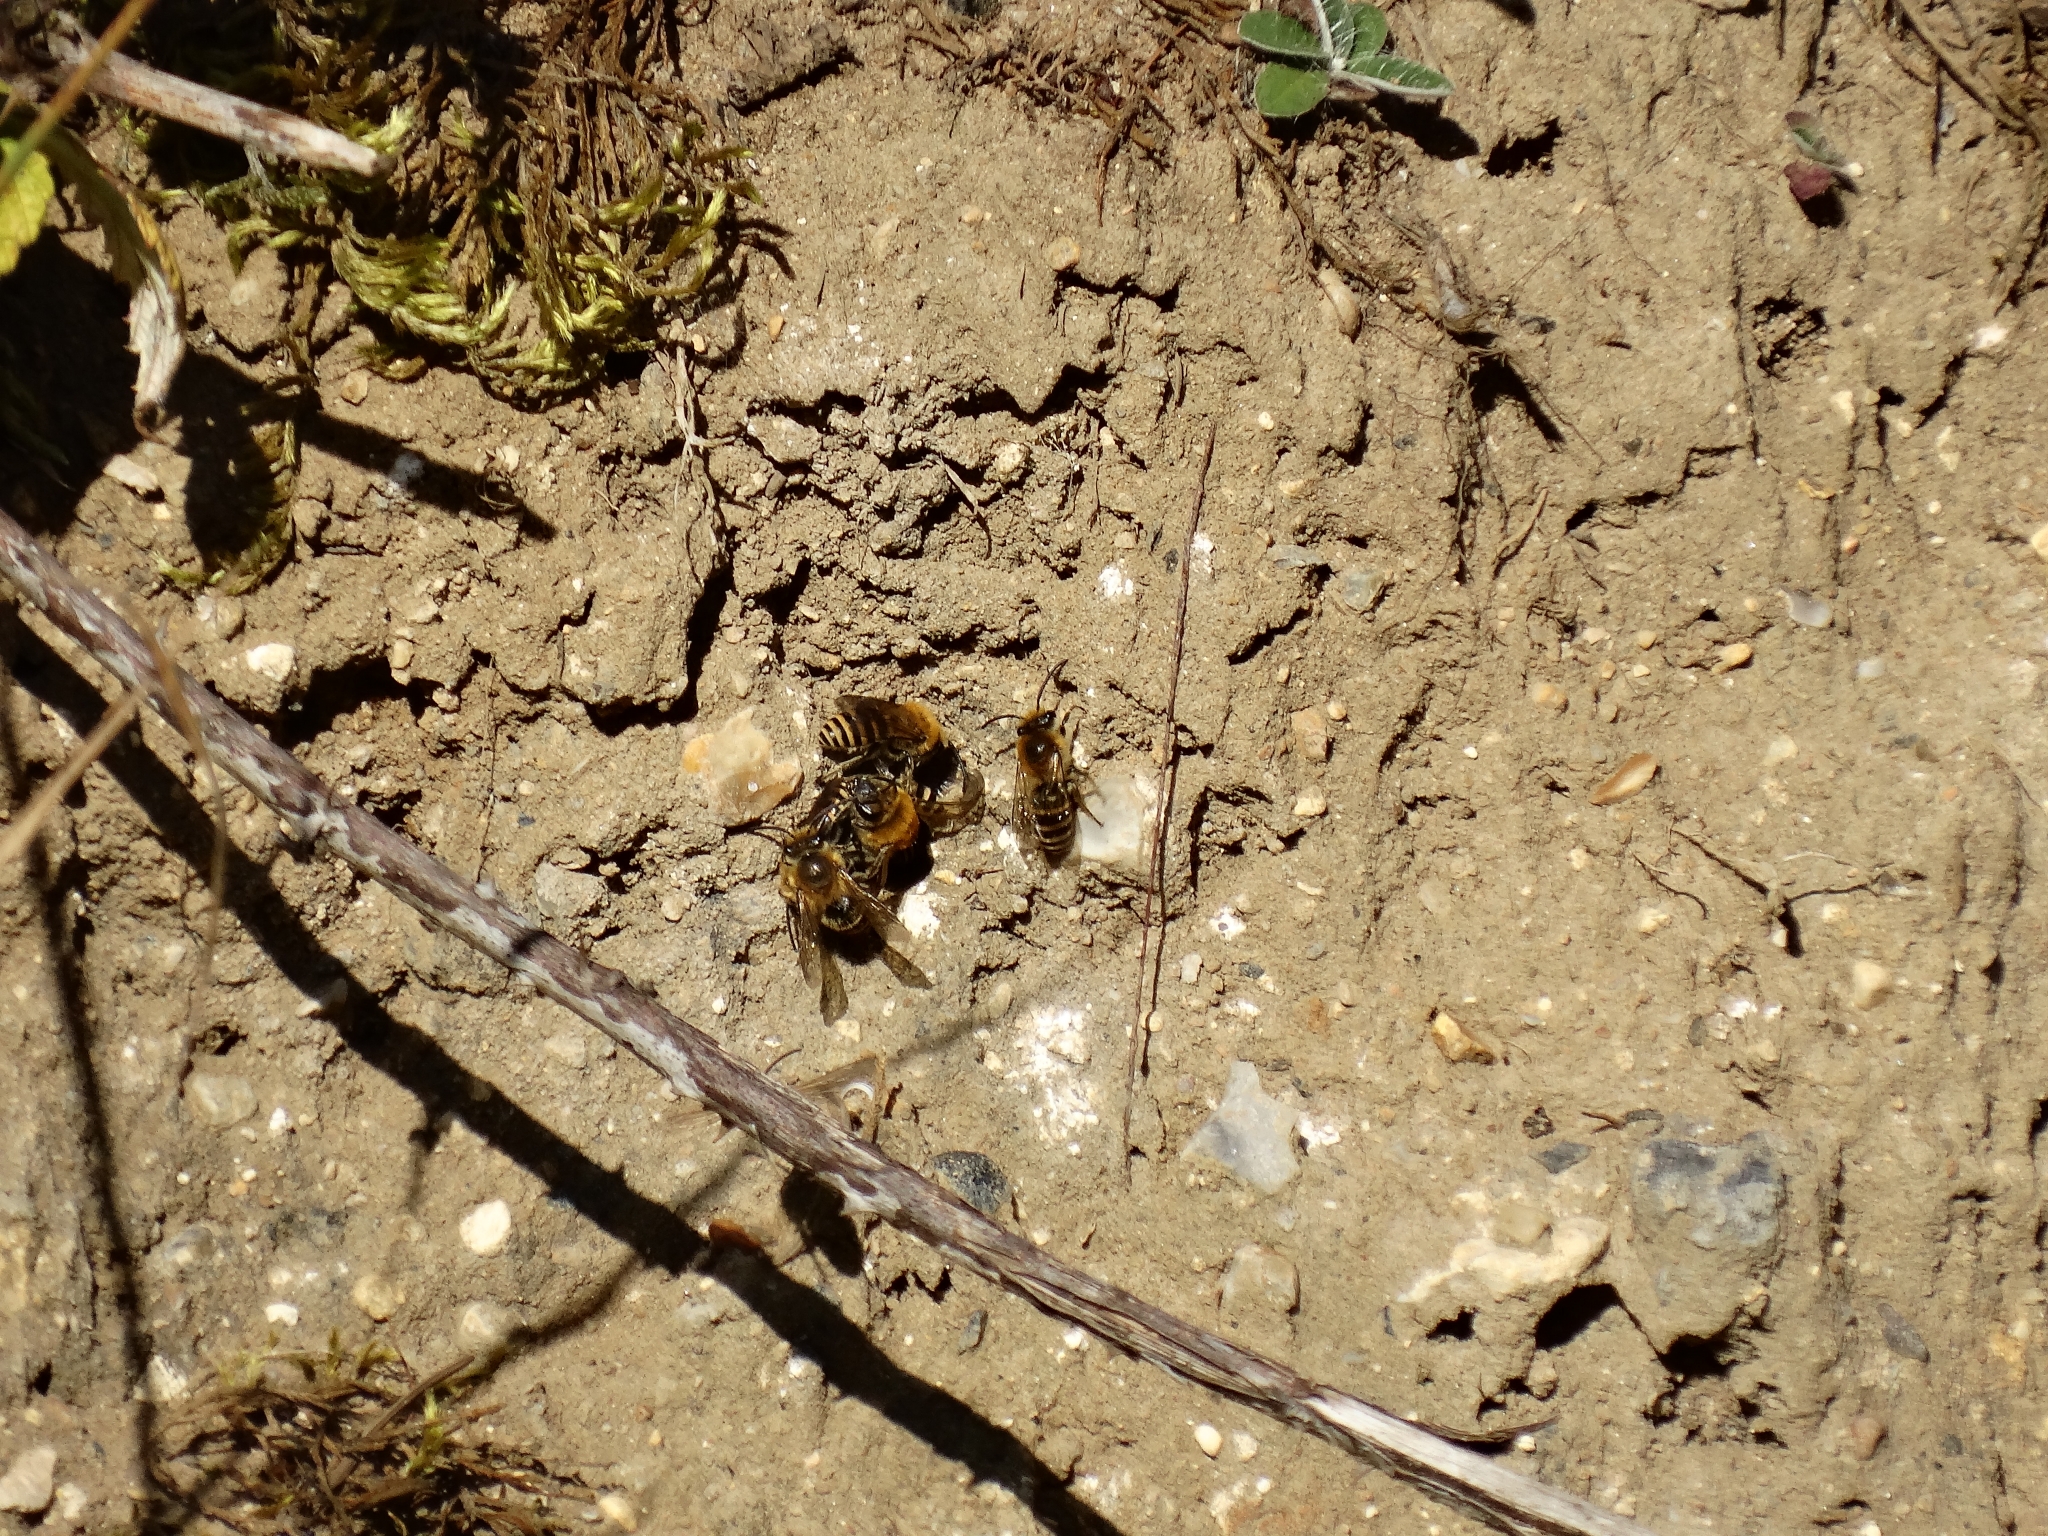 A photo from the FoTF Conservation Event - September 2019 - Scrub Clearance at Cranwich Camp : Insects emerge from a burrow in the soil